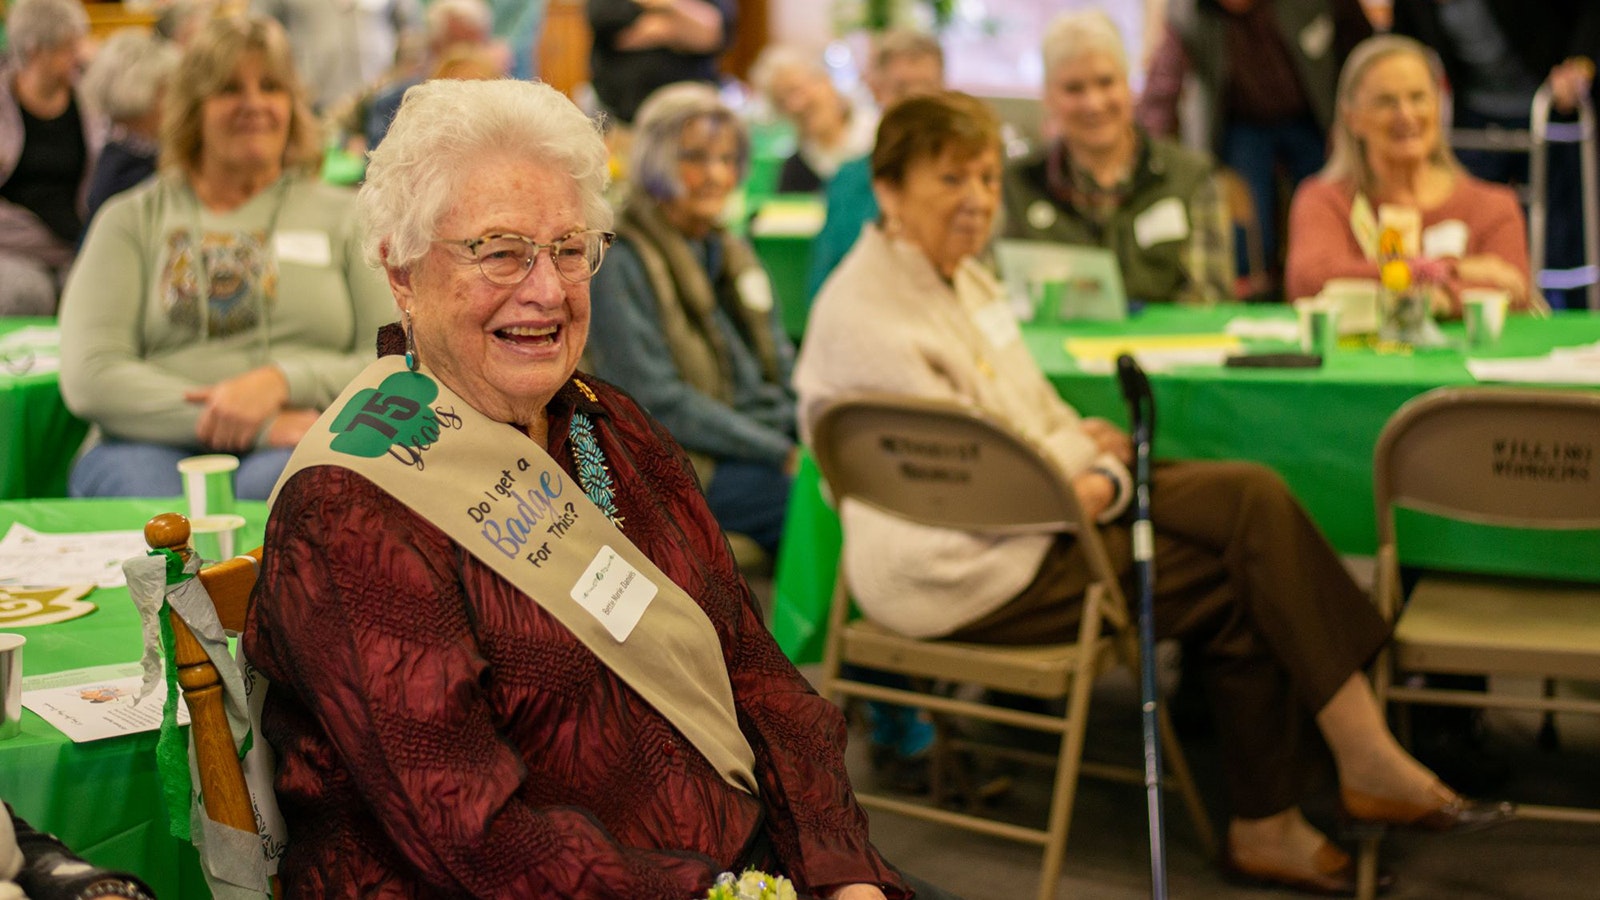 Bettie Marie Daniels enjoys the celebration honoring her lifetime commitment to Girl Scouts. Daniels was recognized for 75 years of dedicated service to the organization recently at the Etoquinnow Girl Scout House in Cody.